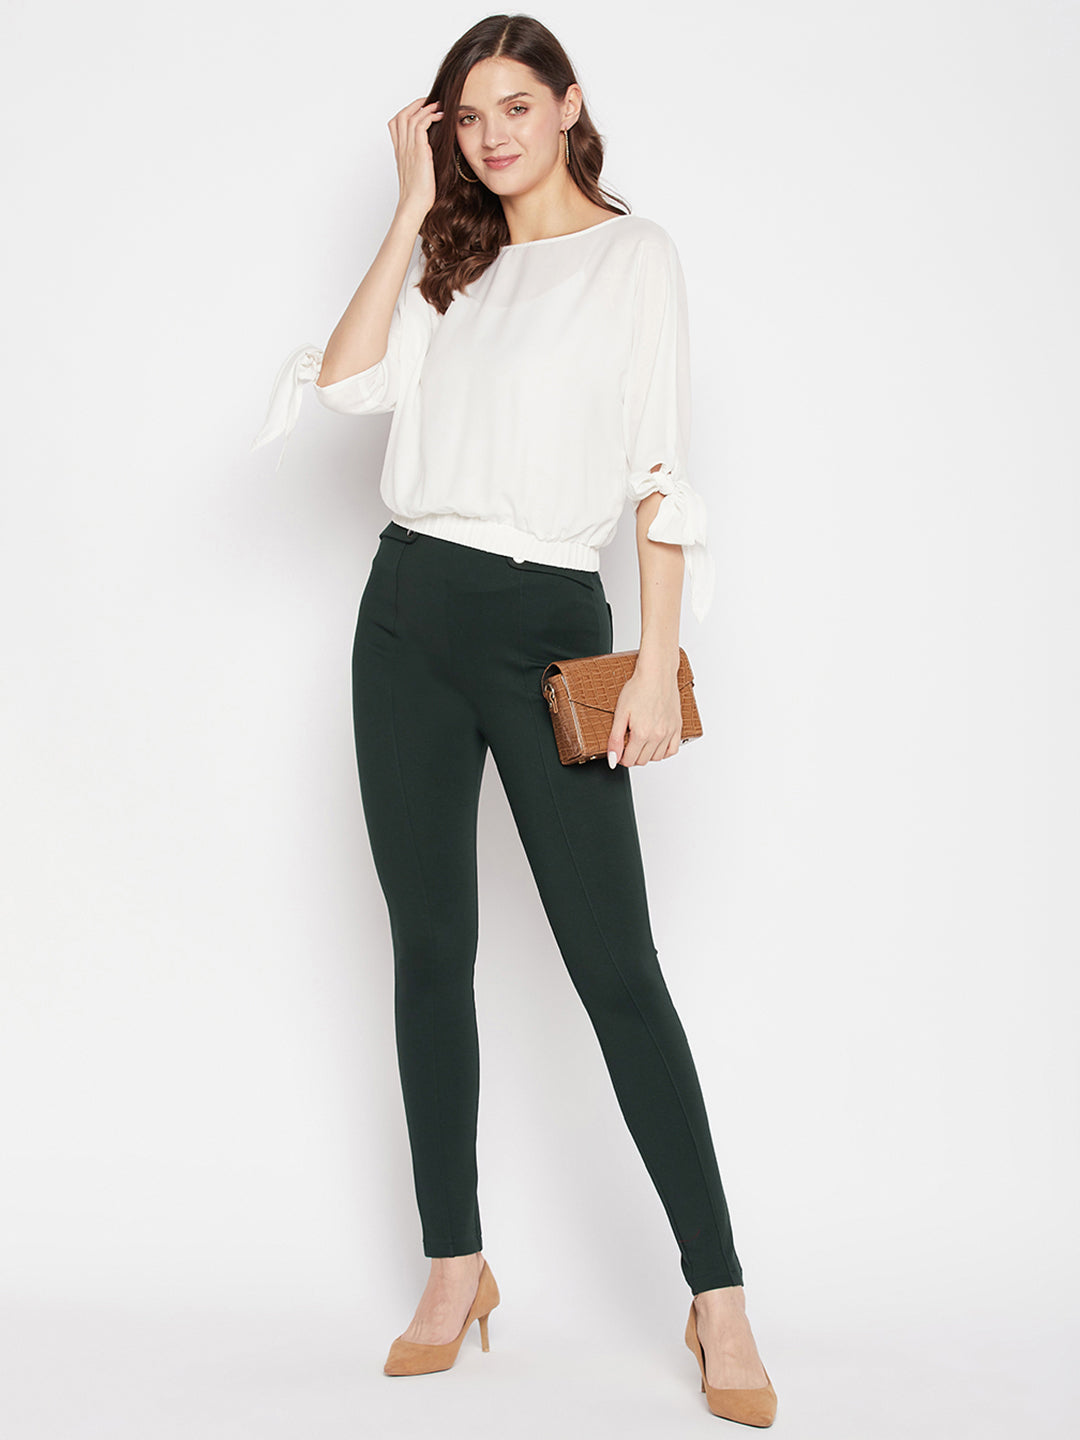 Clora Bottle Green Solid Relaxed Fit Jeggings